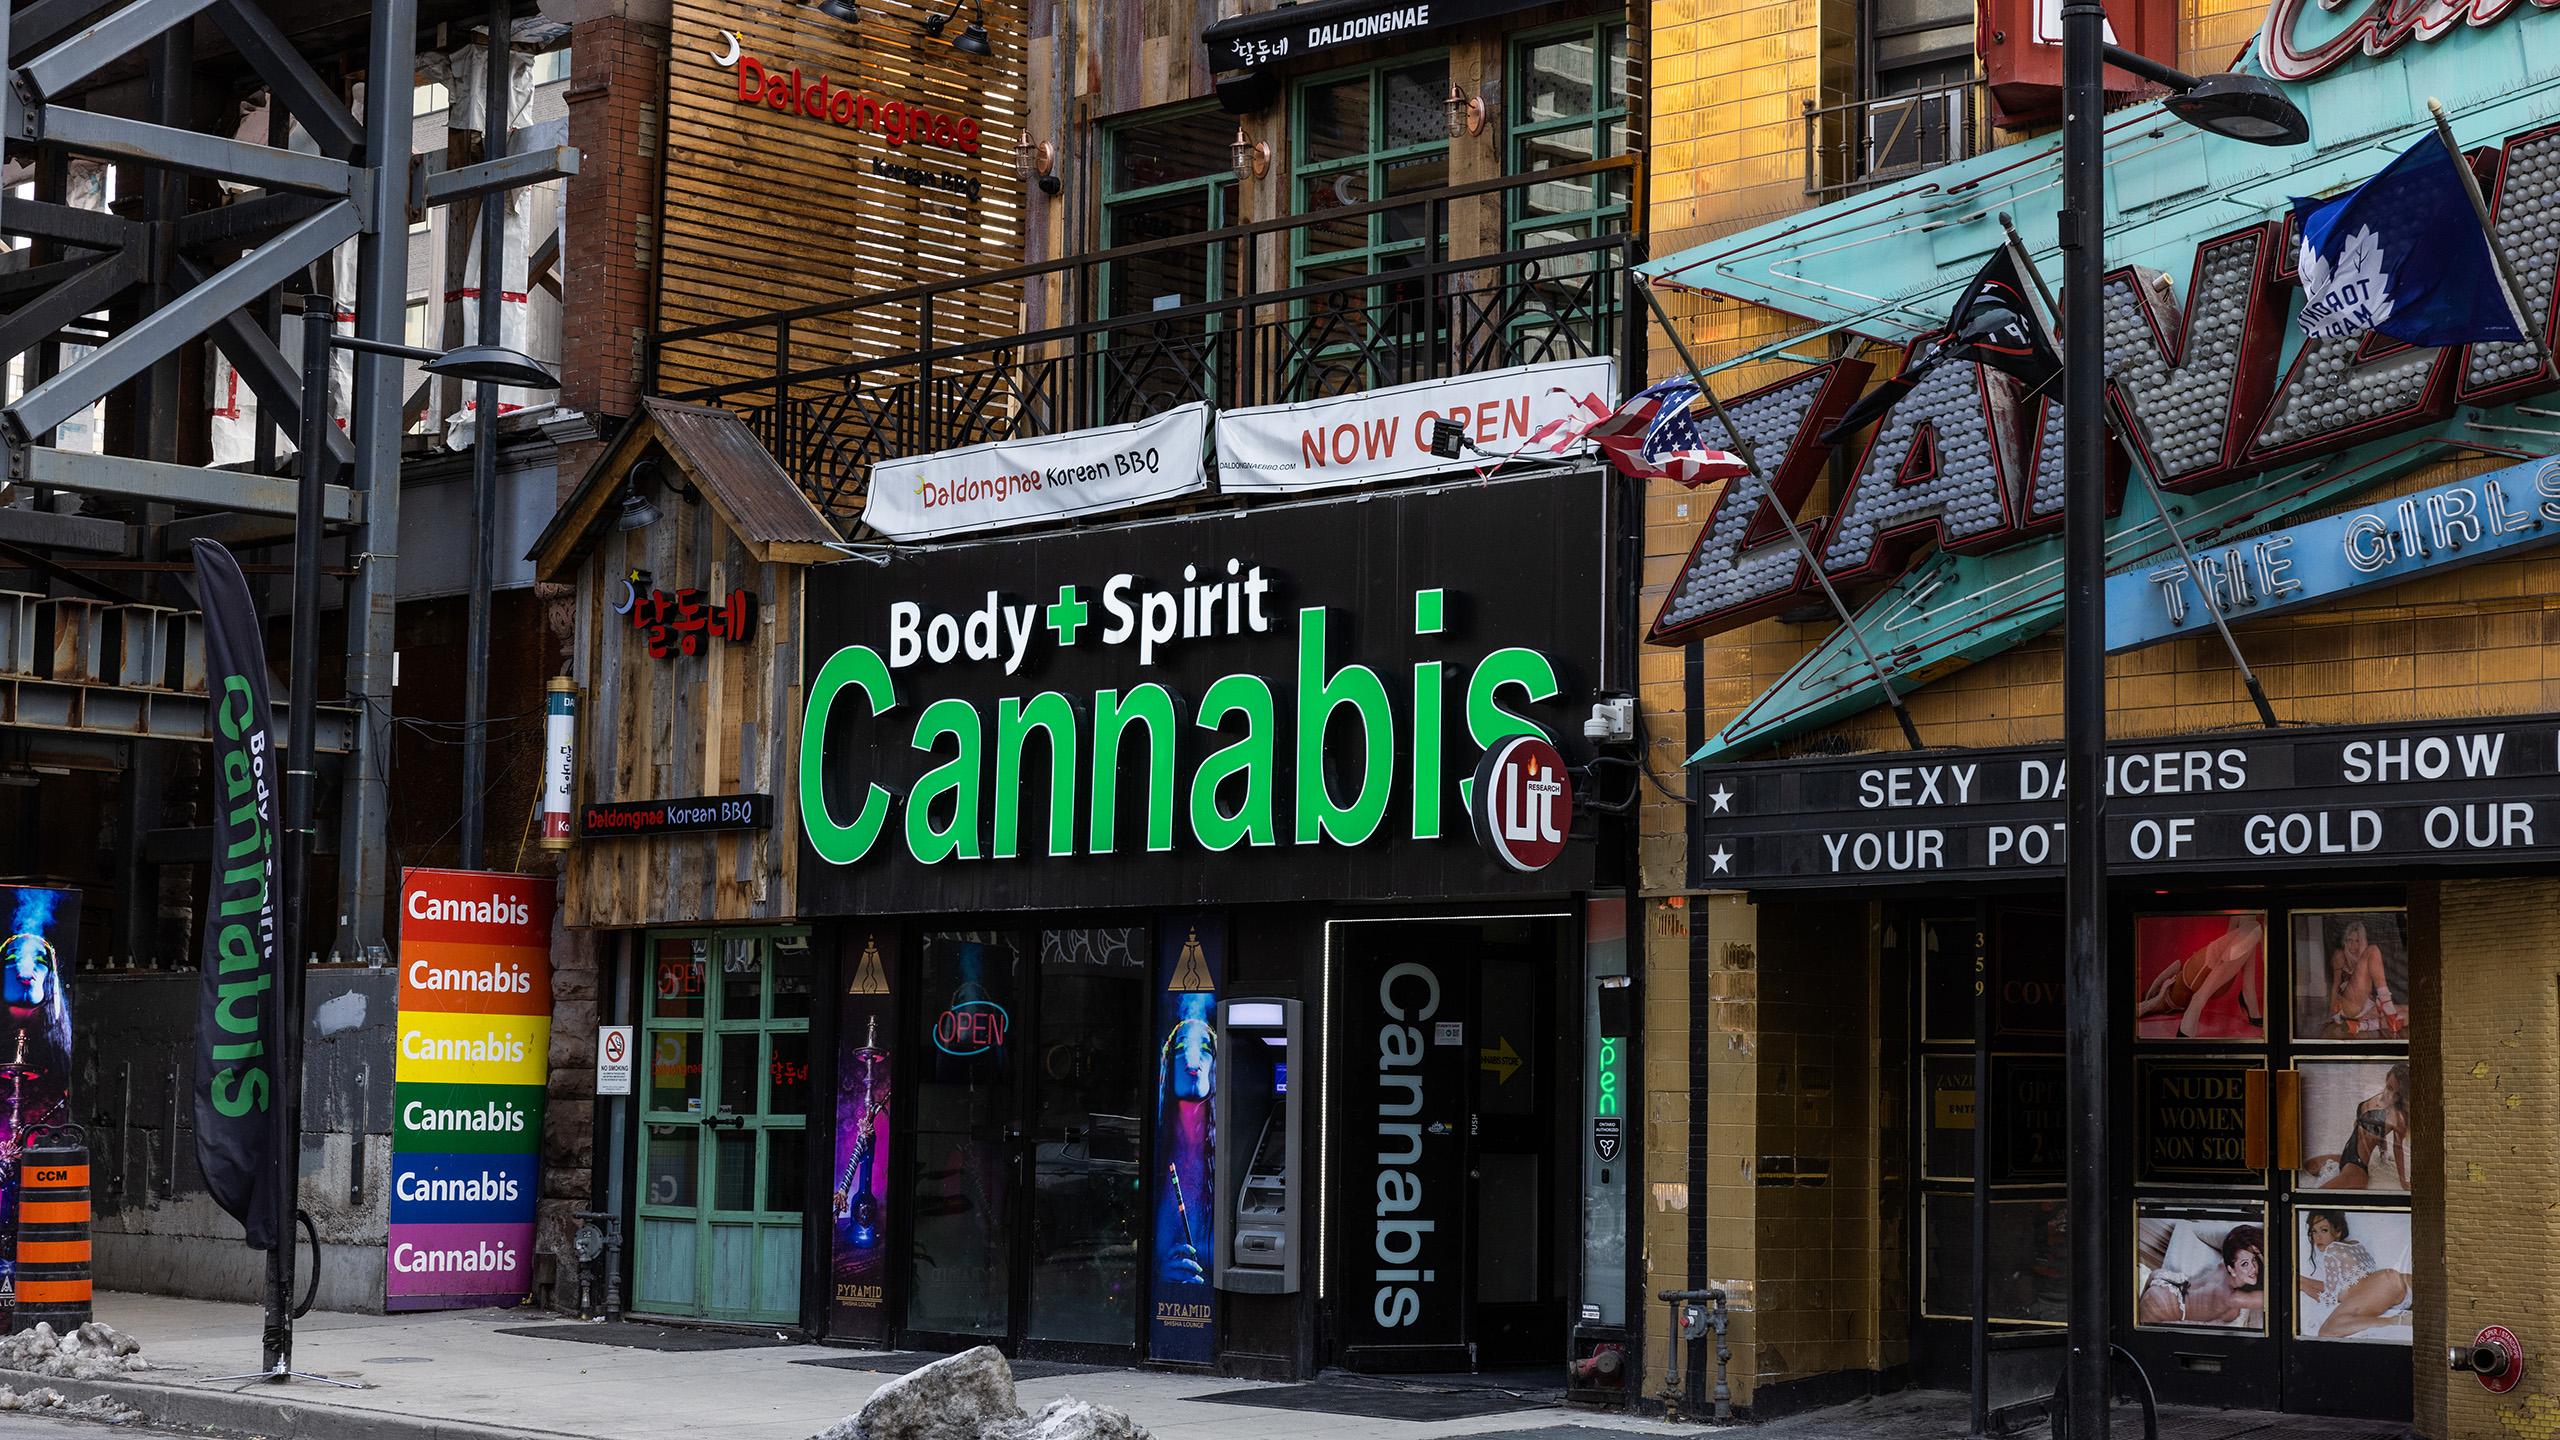 A green sign hanging on a black building reads "Body + Spirit Cannabis"